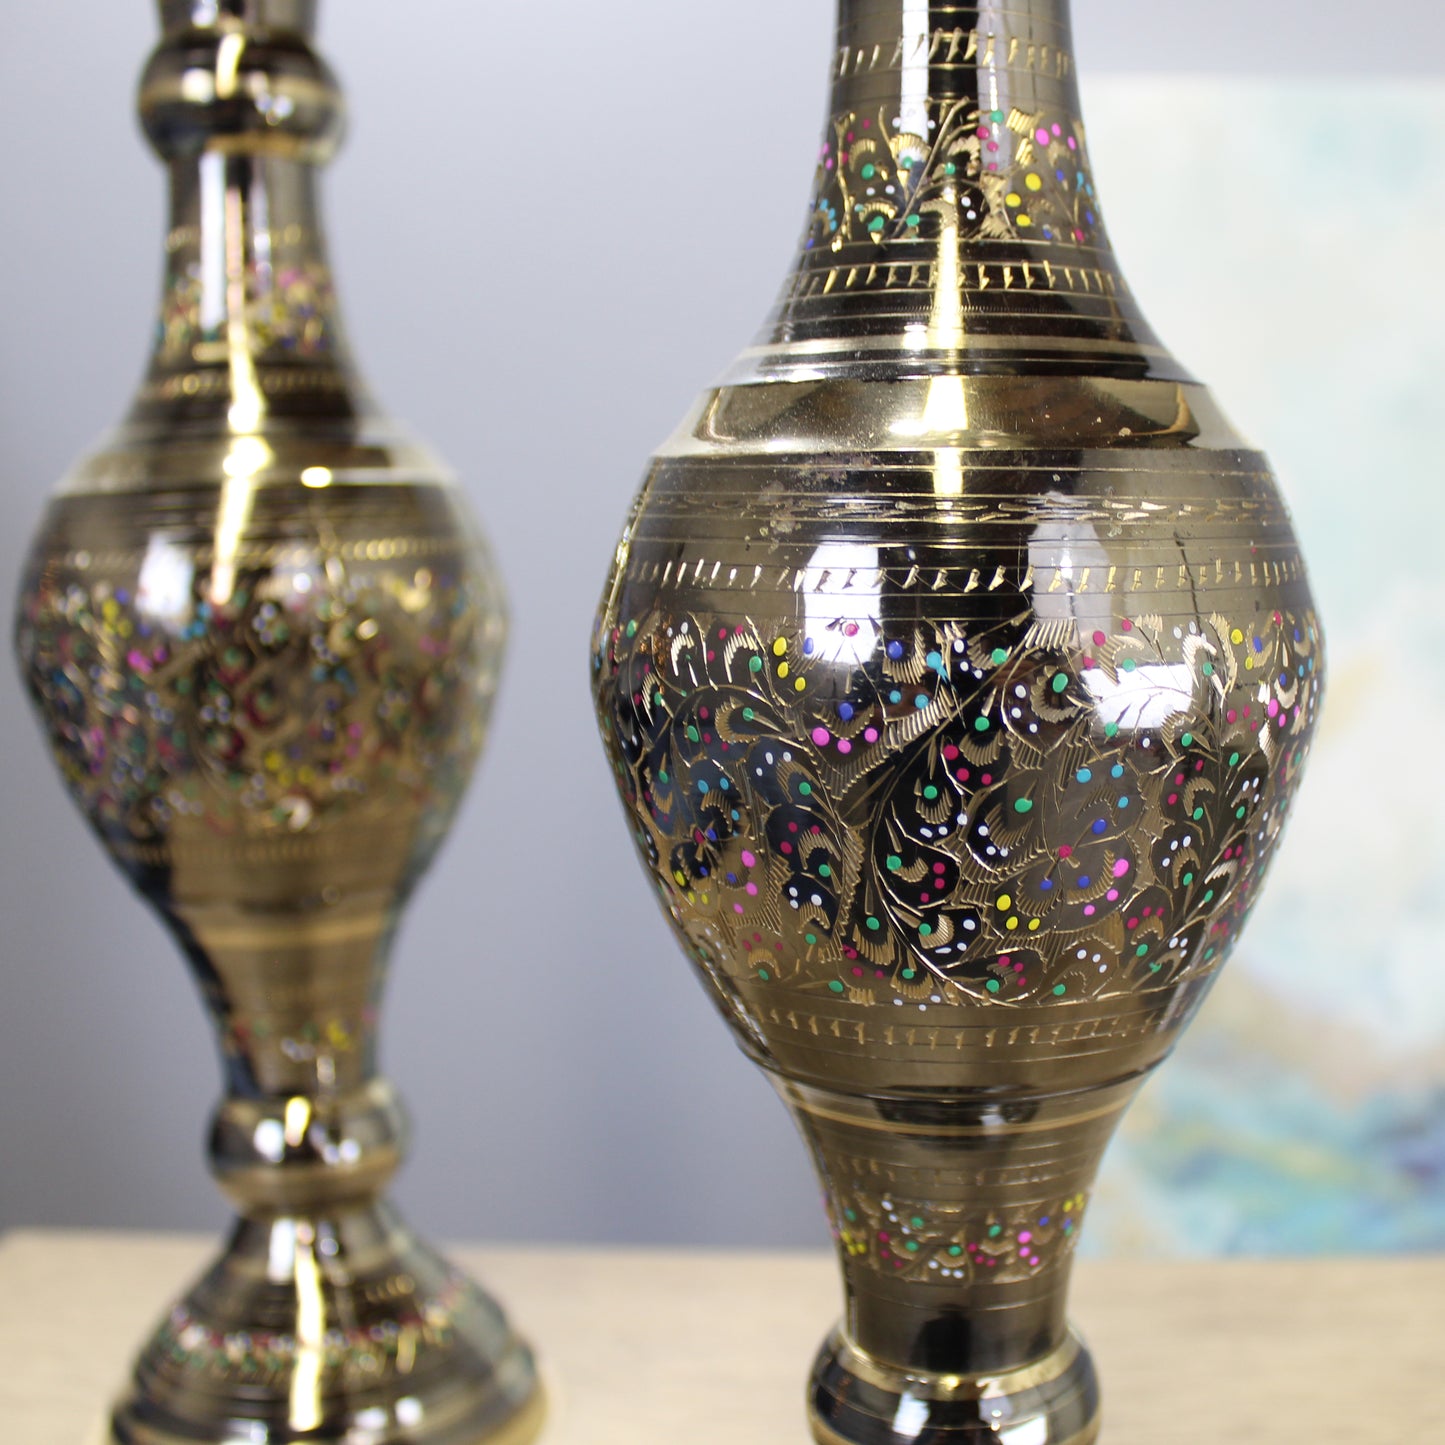 Natural Geo Decorative Brass 14" Multicolored Table Vase - Set of 2